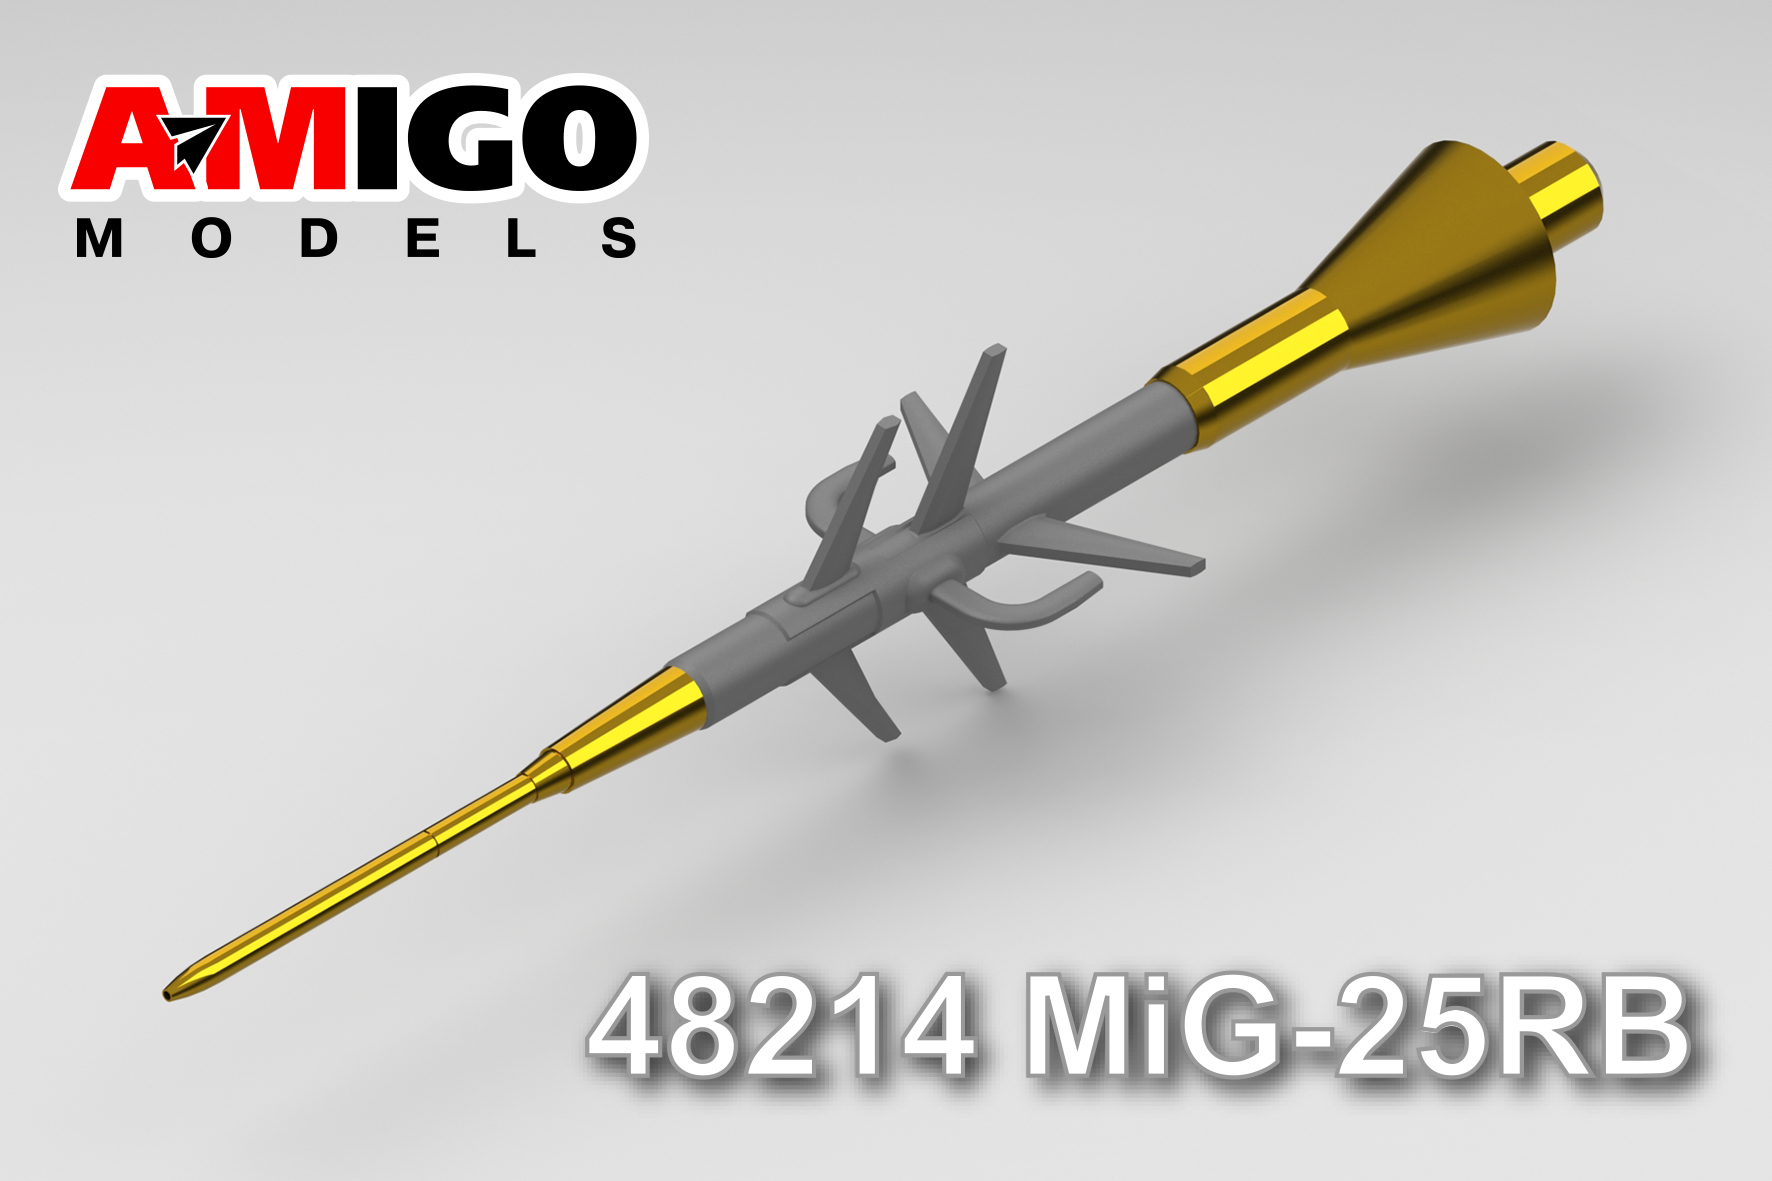 Aircraft detailing sets (brass) 1/48 Pitot tube of MiG-25RB/RBT/RBN/RBS/PU airplanes aircraft (Amigo Models)